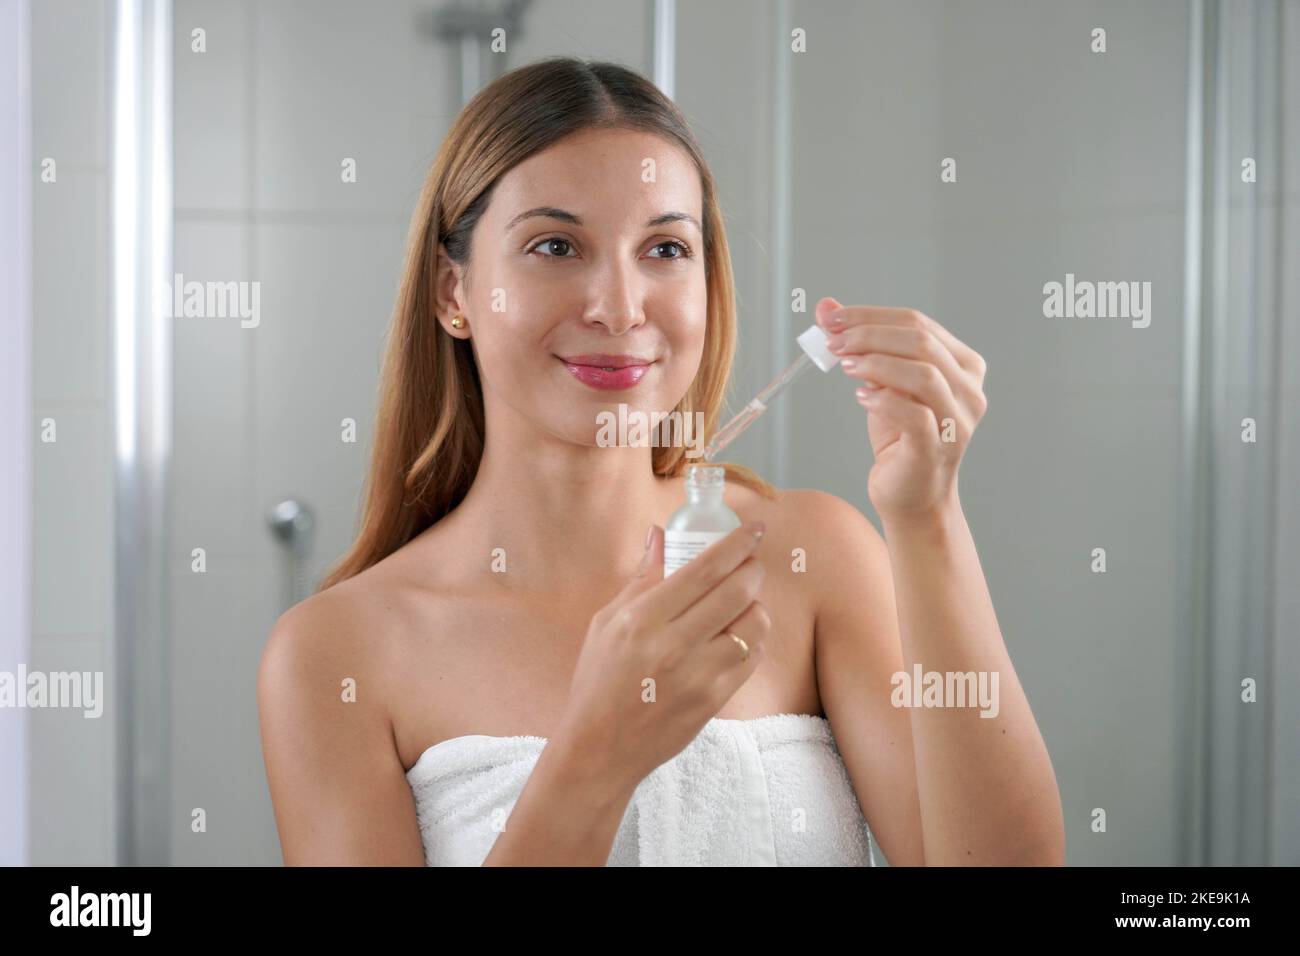 Portrait of a young woman applying Retinol on her face at home. Skin care routine. Stock Photo